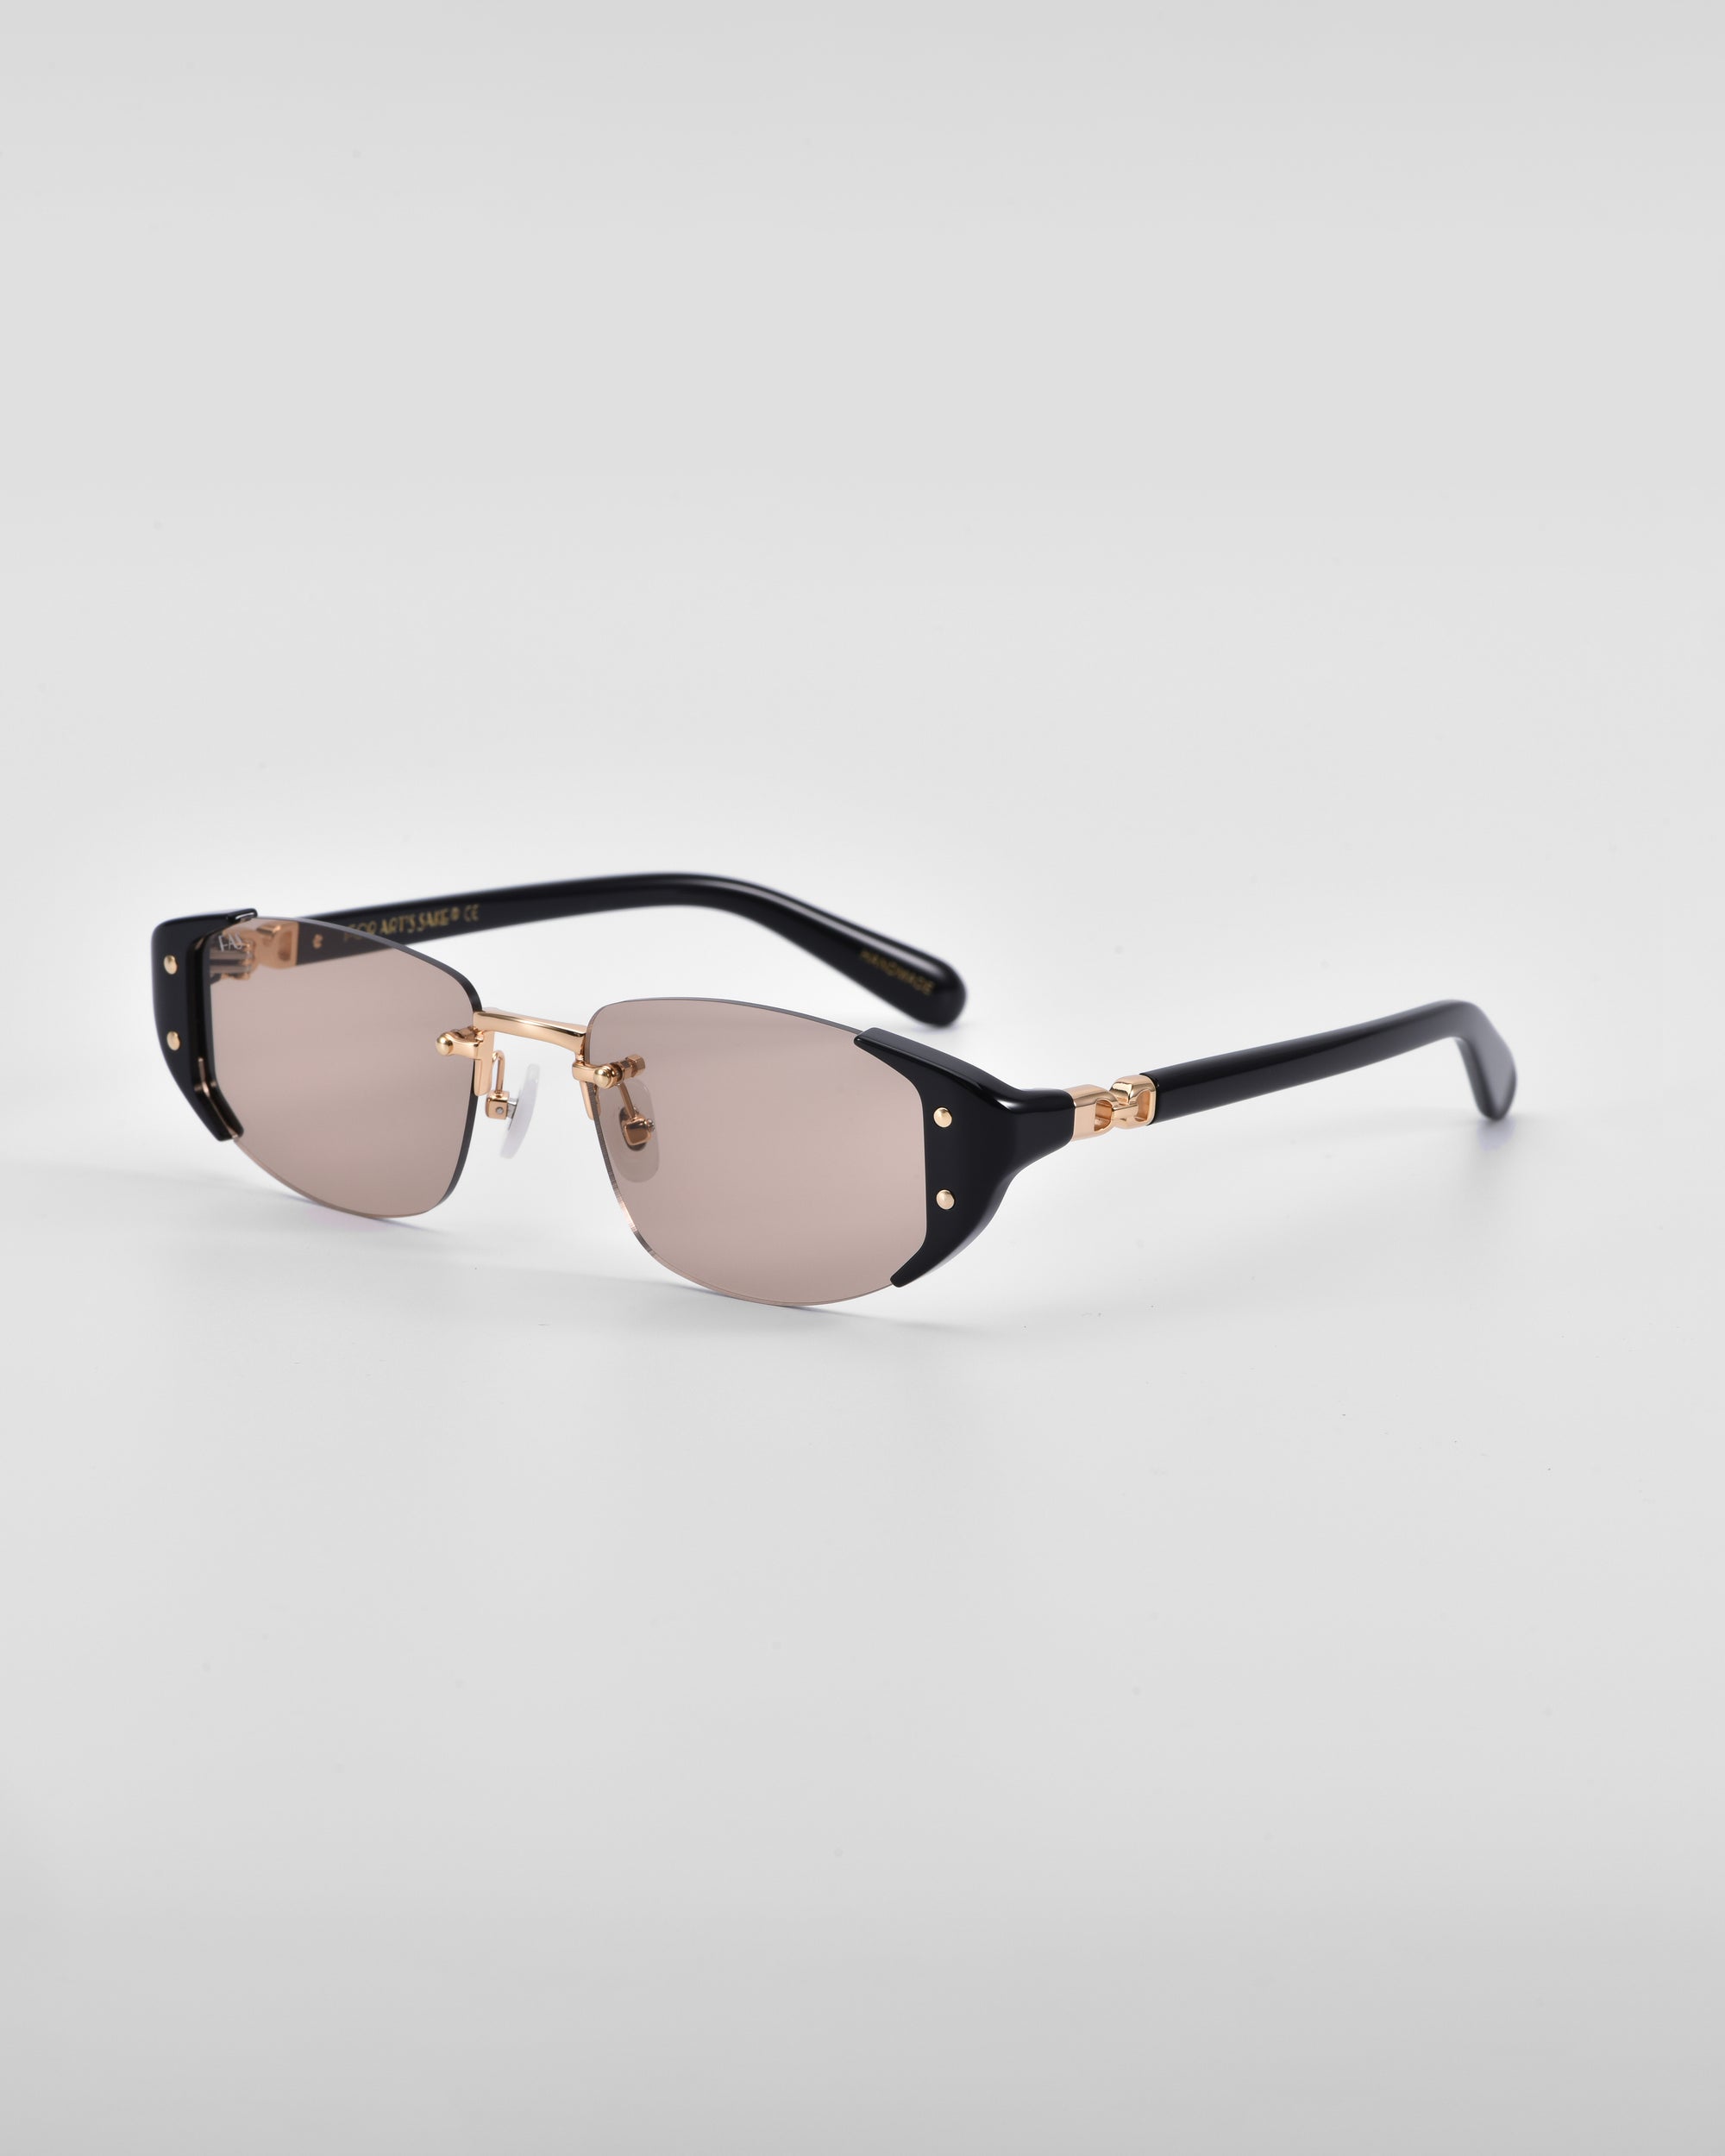 A pair of Harbour sunglasses by For Art&#39;s Sake® with 18 karat gold accents, dark black frames, and slightly tinted lenses. The temples feature retro-inspired gold details near the hinges. Set against a plain white background, these sunglasses highlight a sleek, modern design.